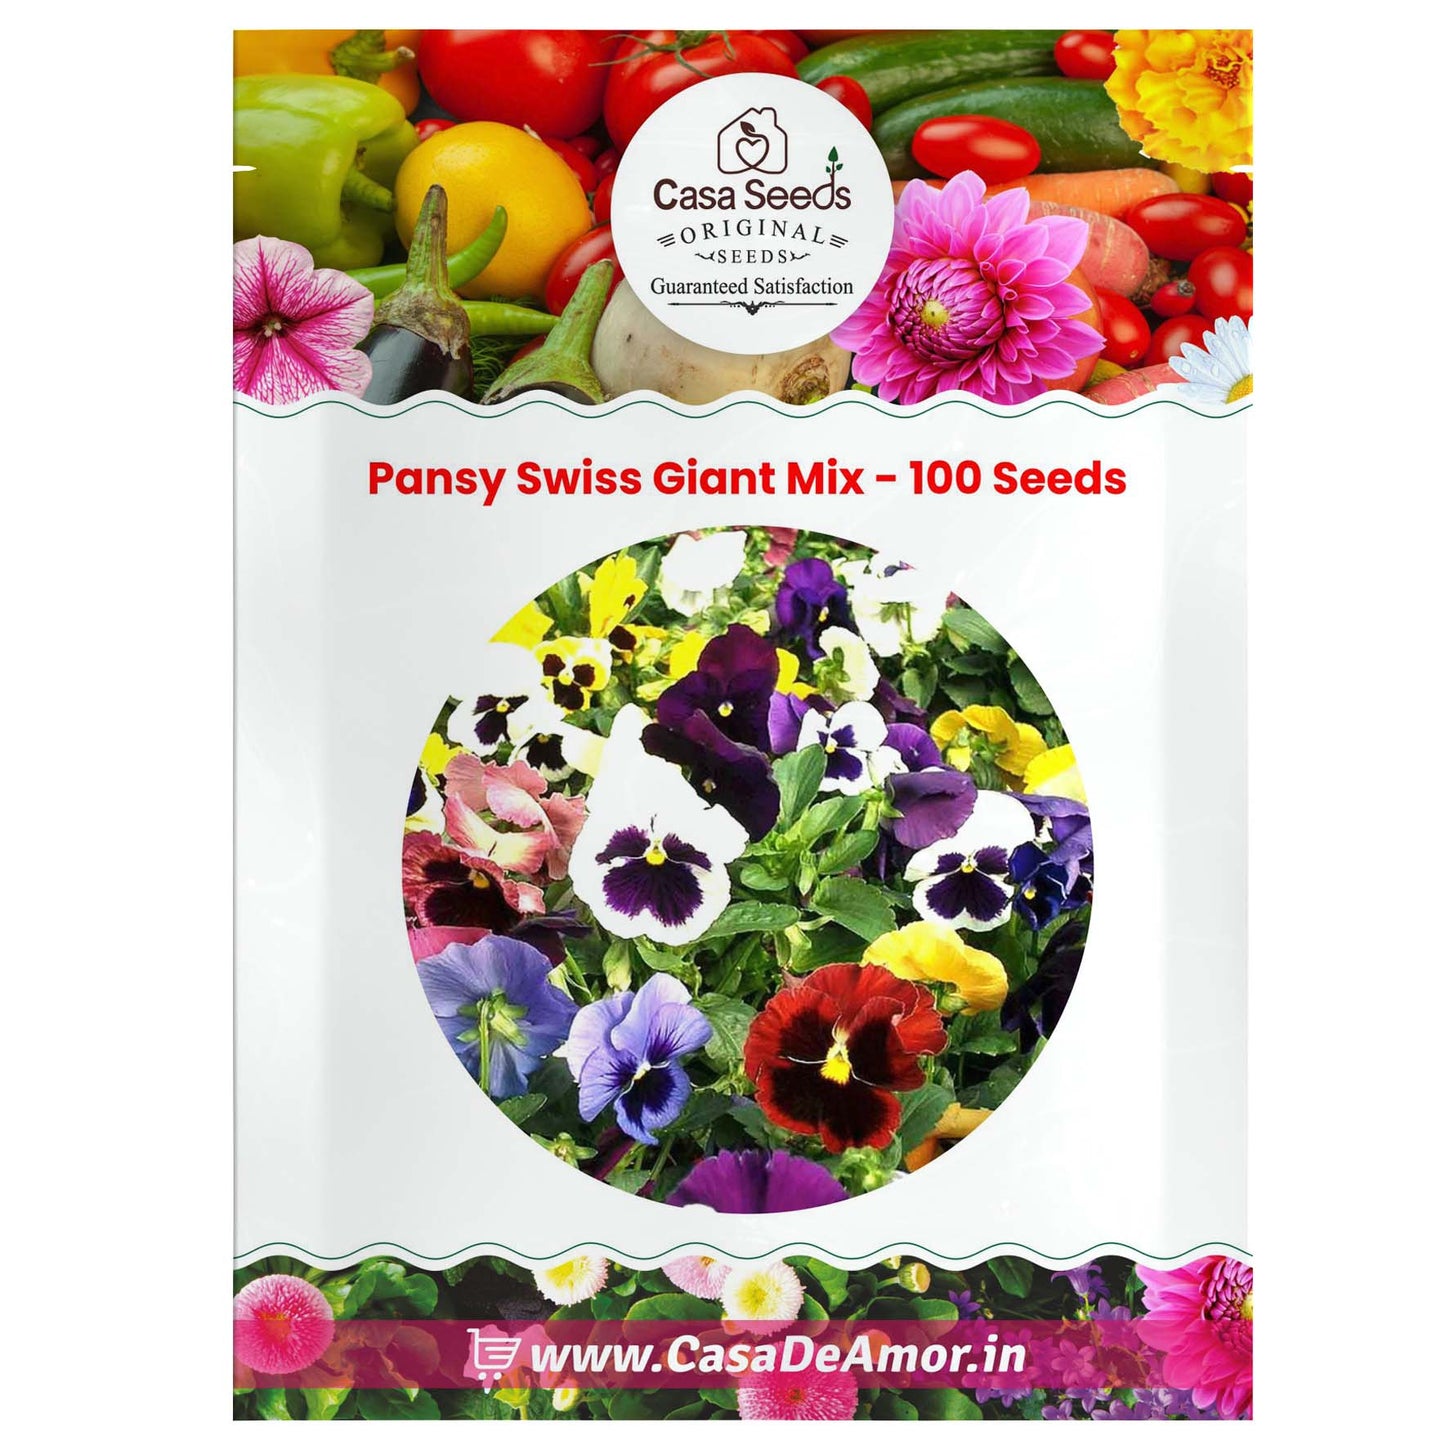 Pansy Swiss Giant Mix - 100 Seeds